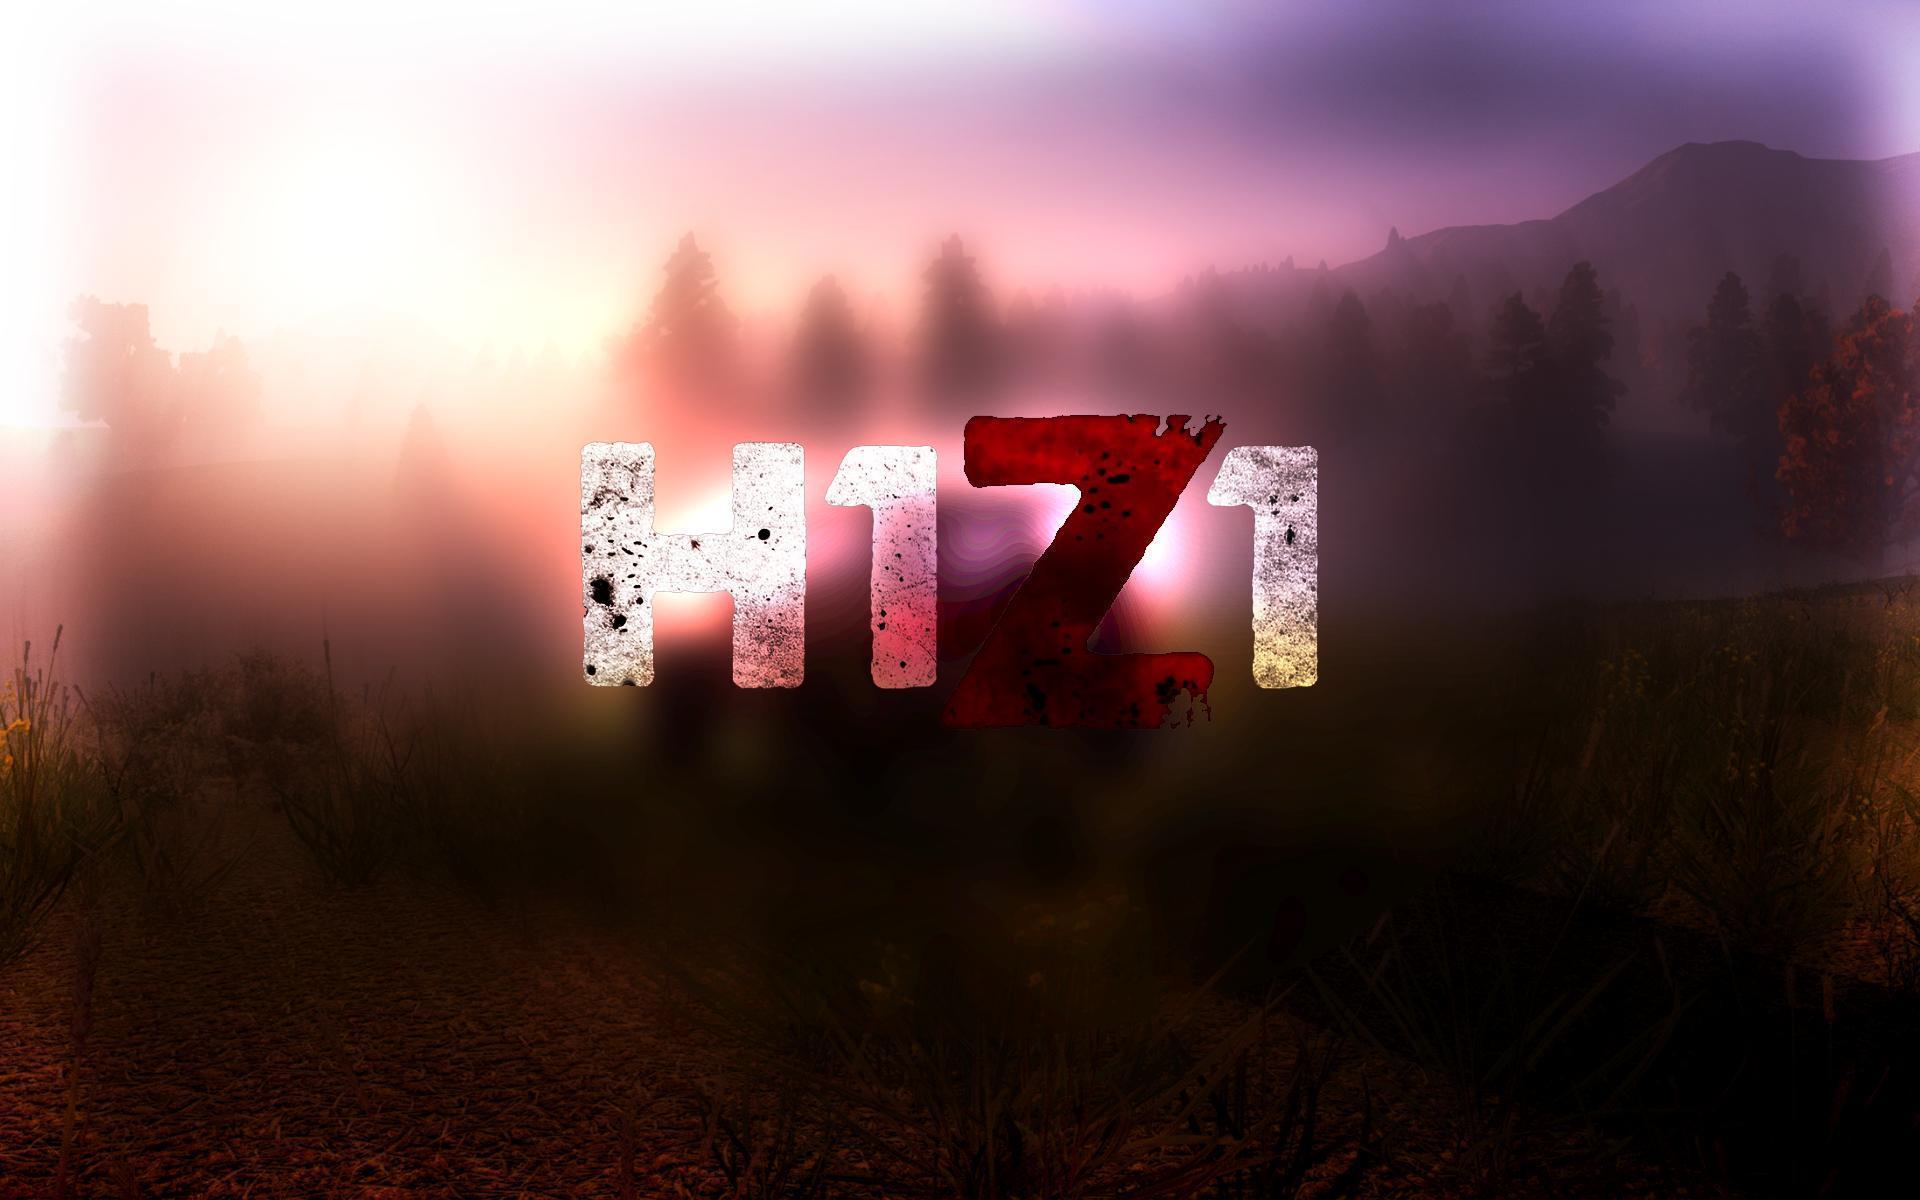 H1Z1 1280X720 Wallpapers